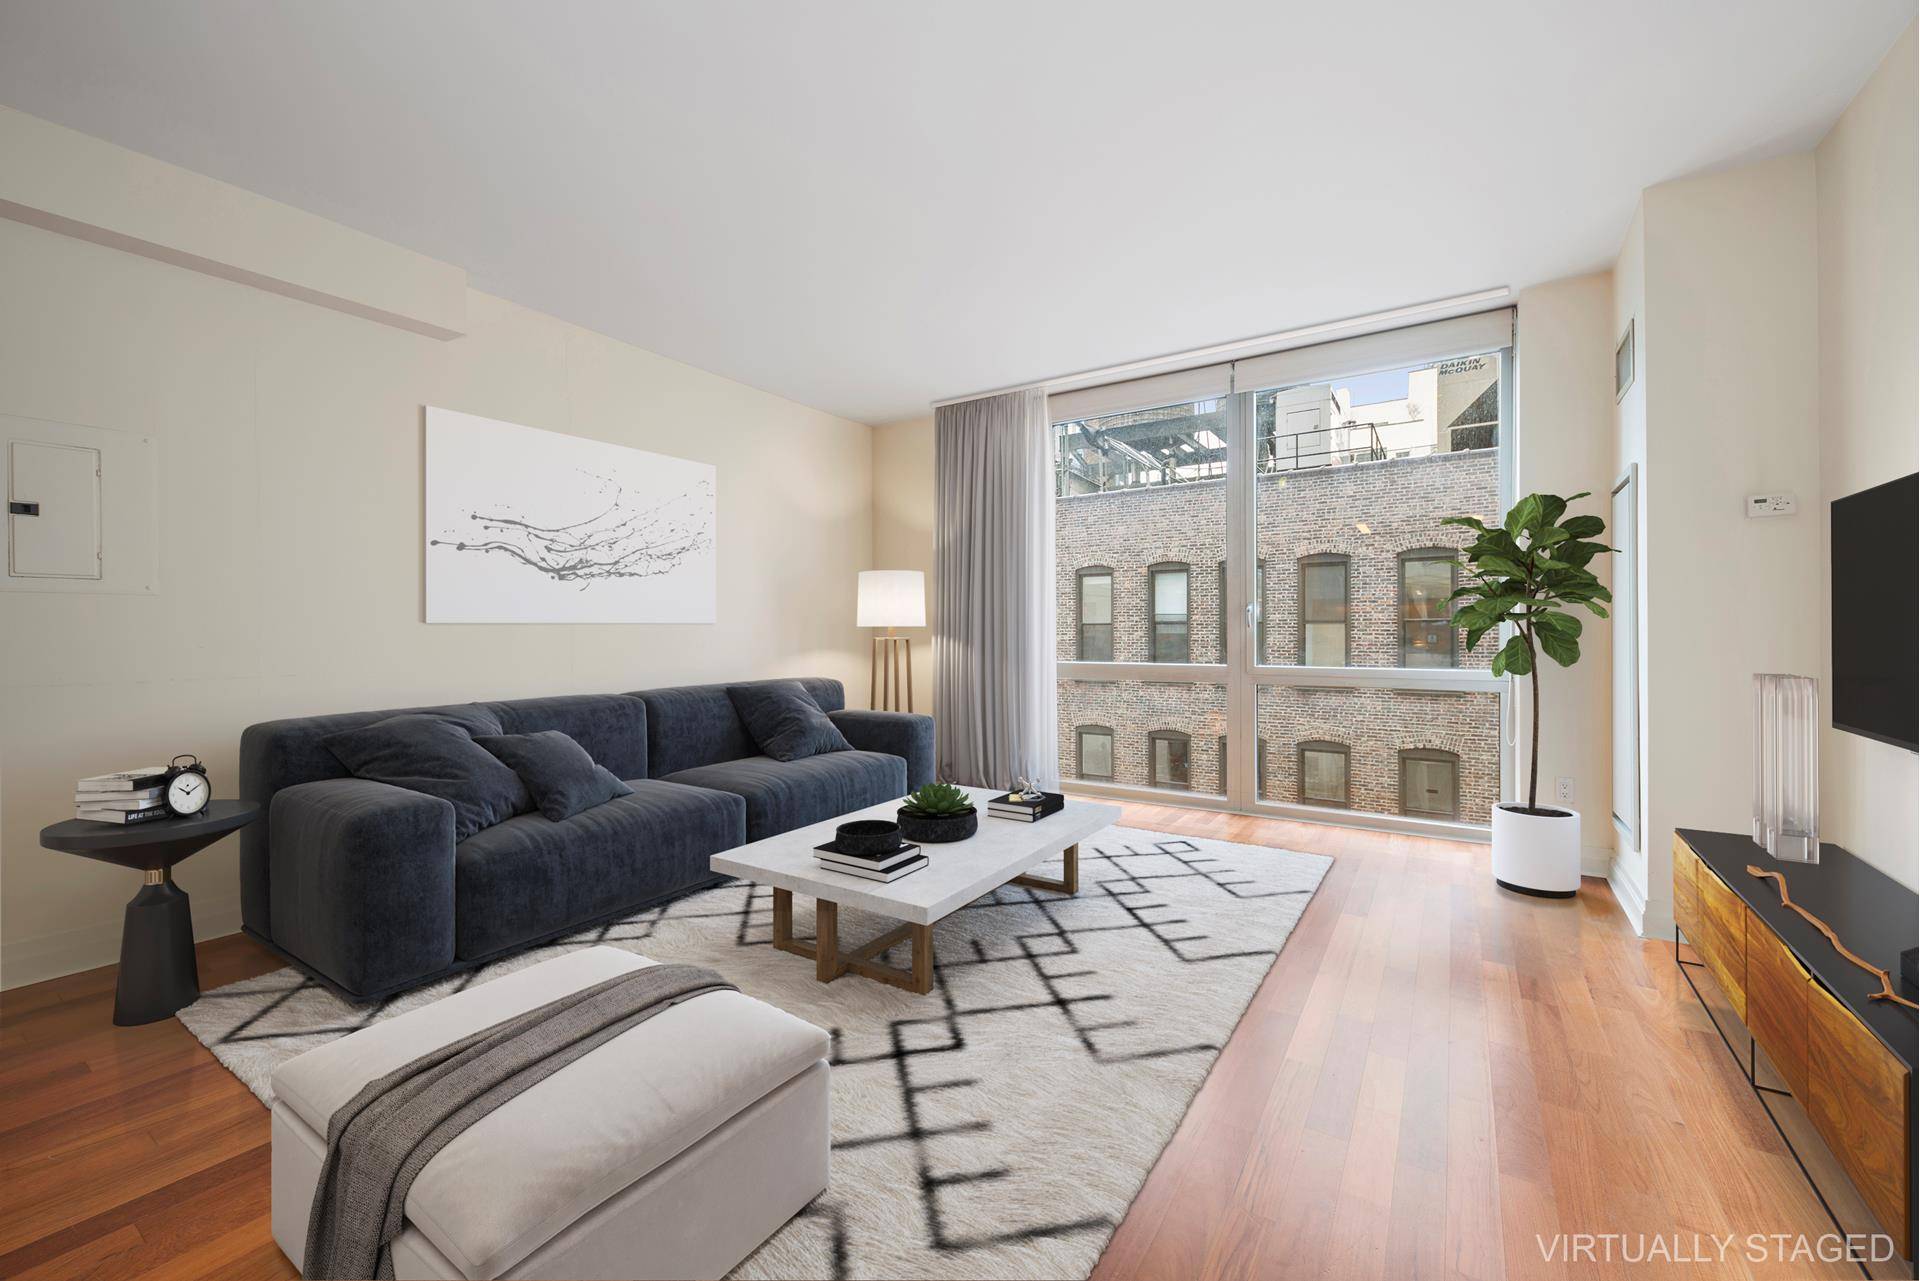 Unit 15D is a high floor oversized one bedroom at the luxurious Twenty9th Park Madison Condominium in the heart of NoMad.